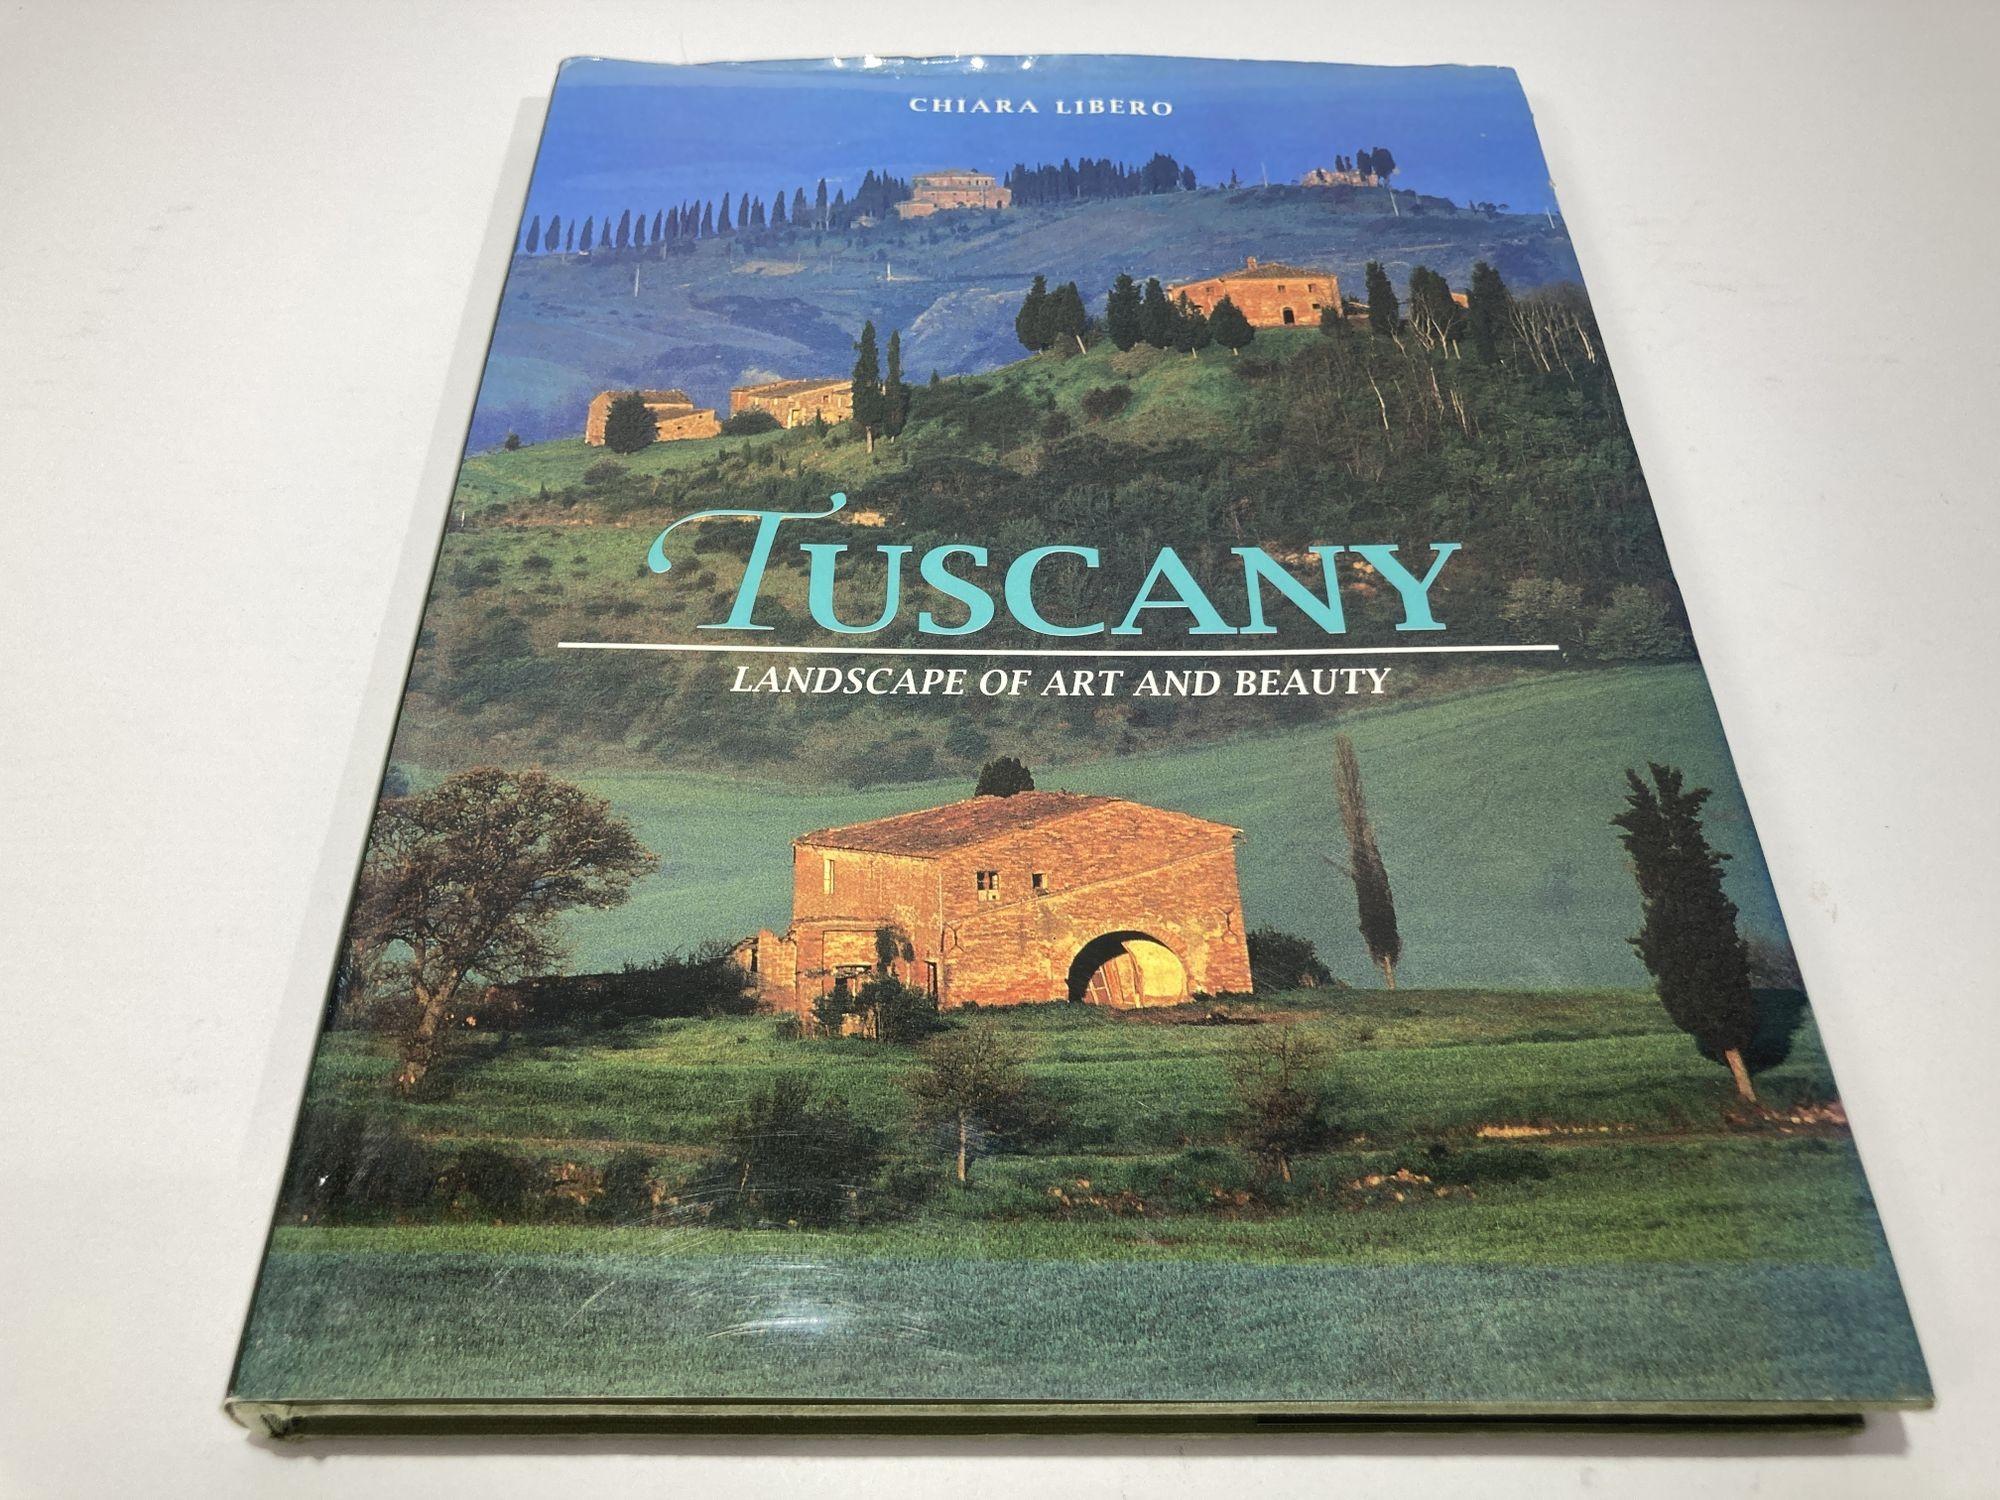 Tuscany: Landscape of Art and Beauty Chiara Libero Hardcover Book.
160 Pages, hardcover
First edition first published April 1, 1995
A full-color, photographic tour through Tuscany depicts the region's noted countryside, skilled architecture,